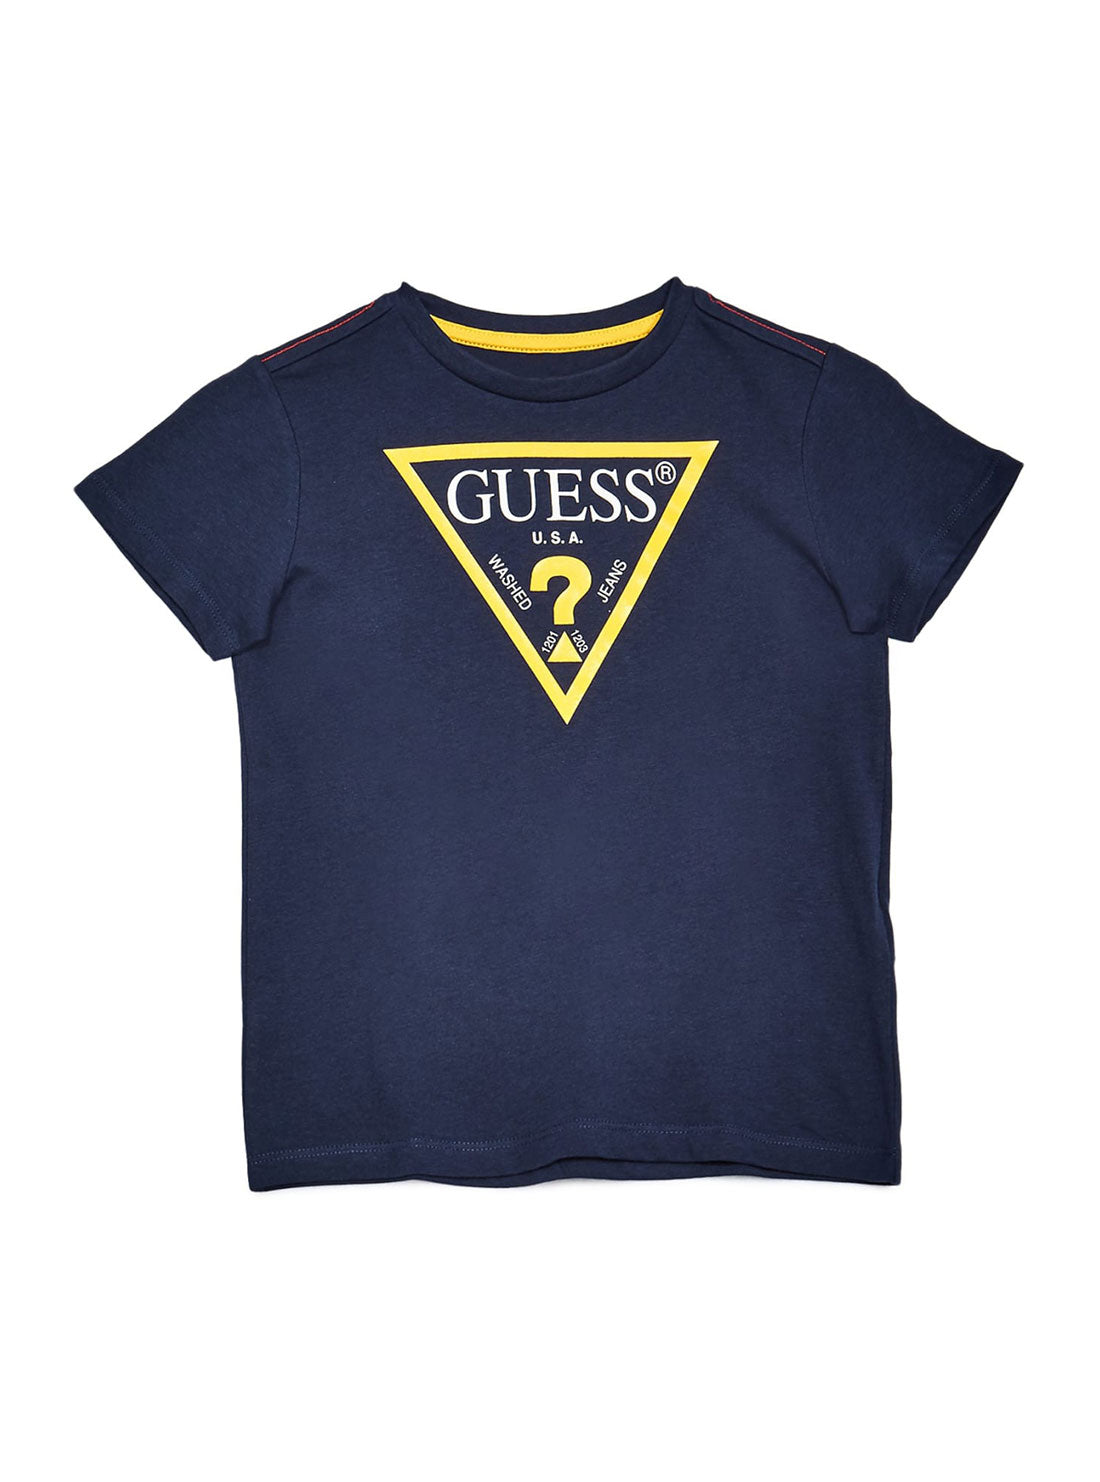 GUESS Little Boys Navy Blue Short Sleeve Triangle Logo Tee (2-7)  N73I55K5M20 Front View